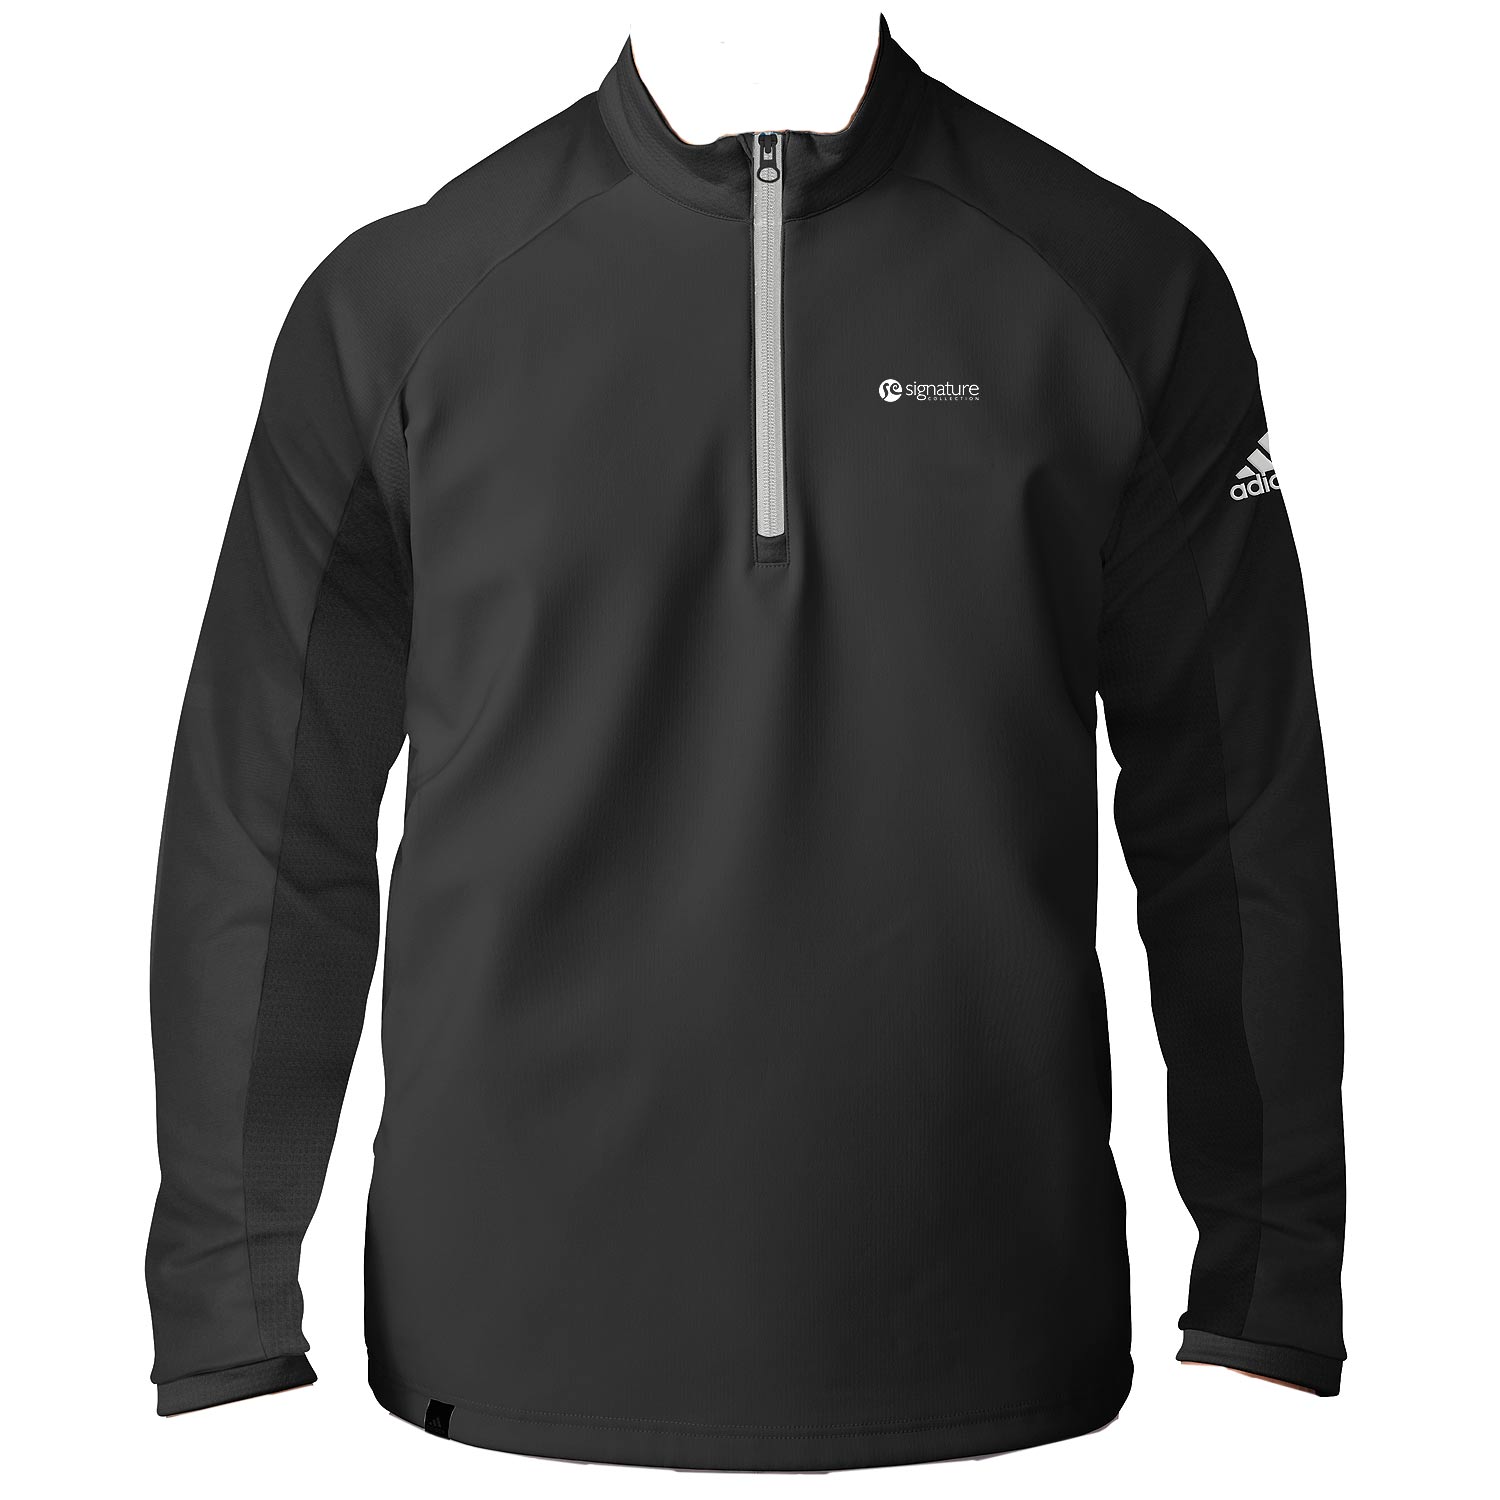 adidas 1/4 Zip Layering Pullover - Men's | Push Promotional Products - Promotional Products, Promotional Items, Promotional Products & Services